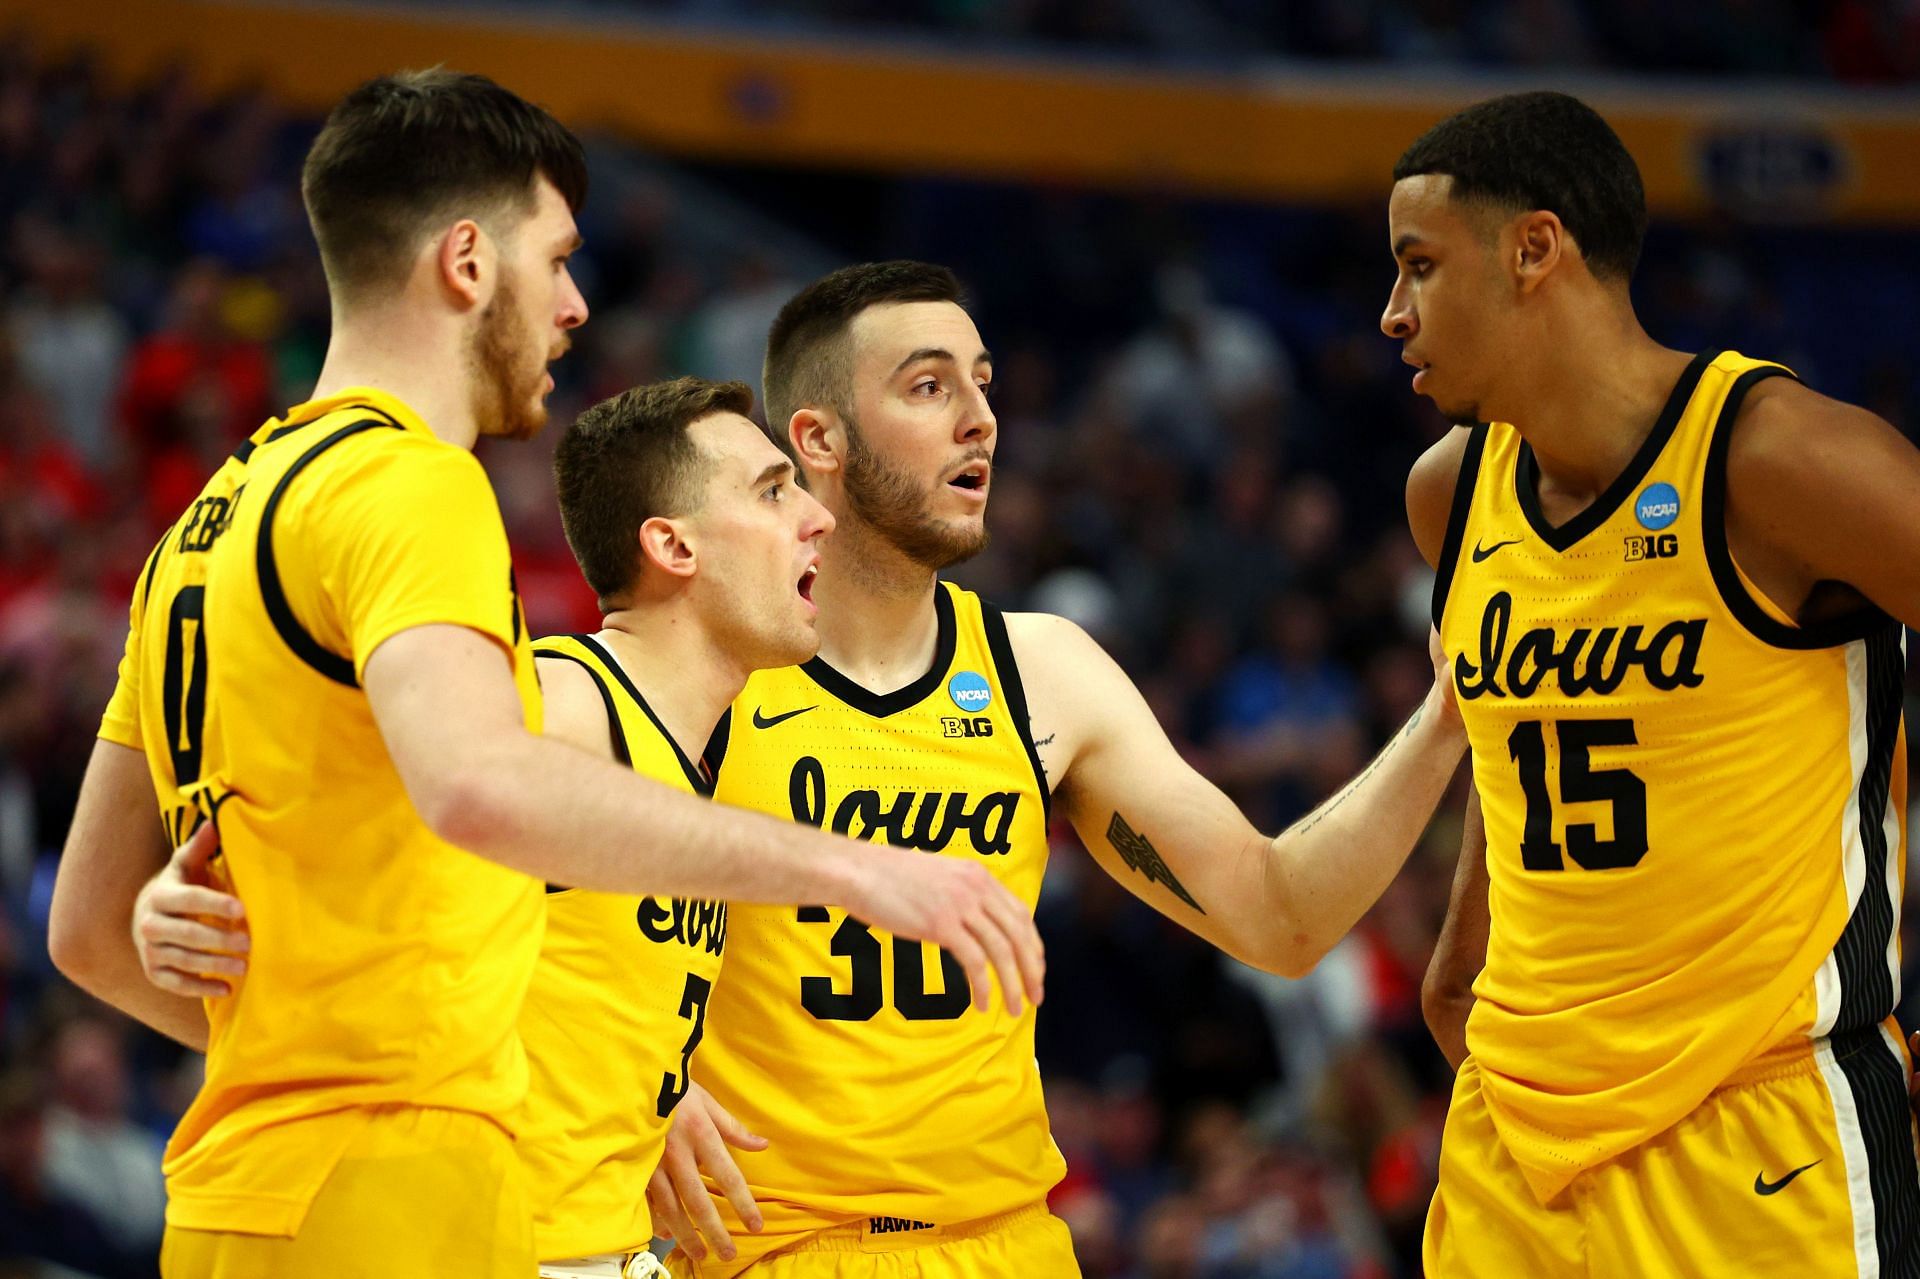 Why analysts believe Iowa's Keegan Murray could be an NBA first-rounder